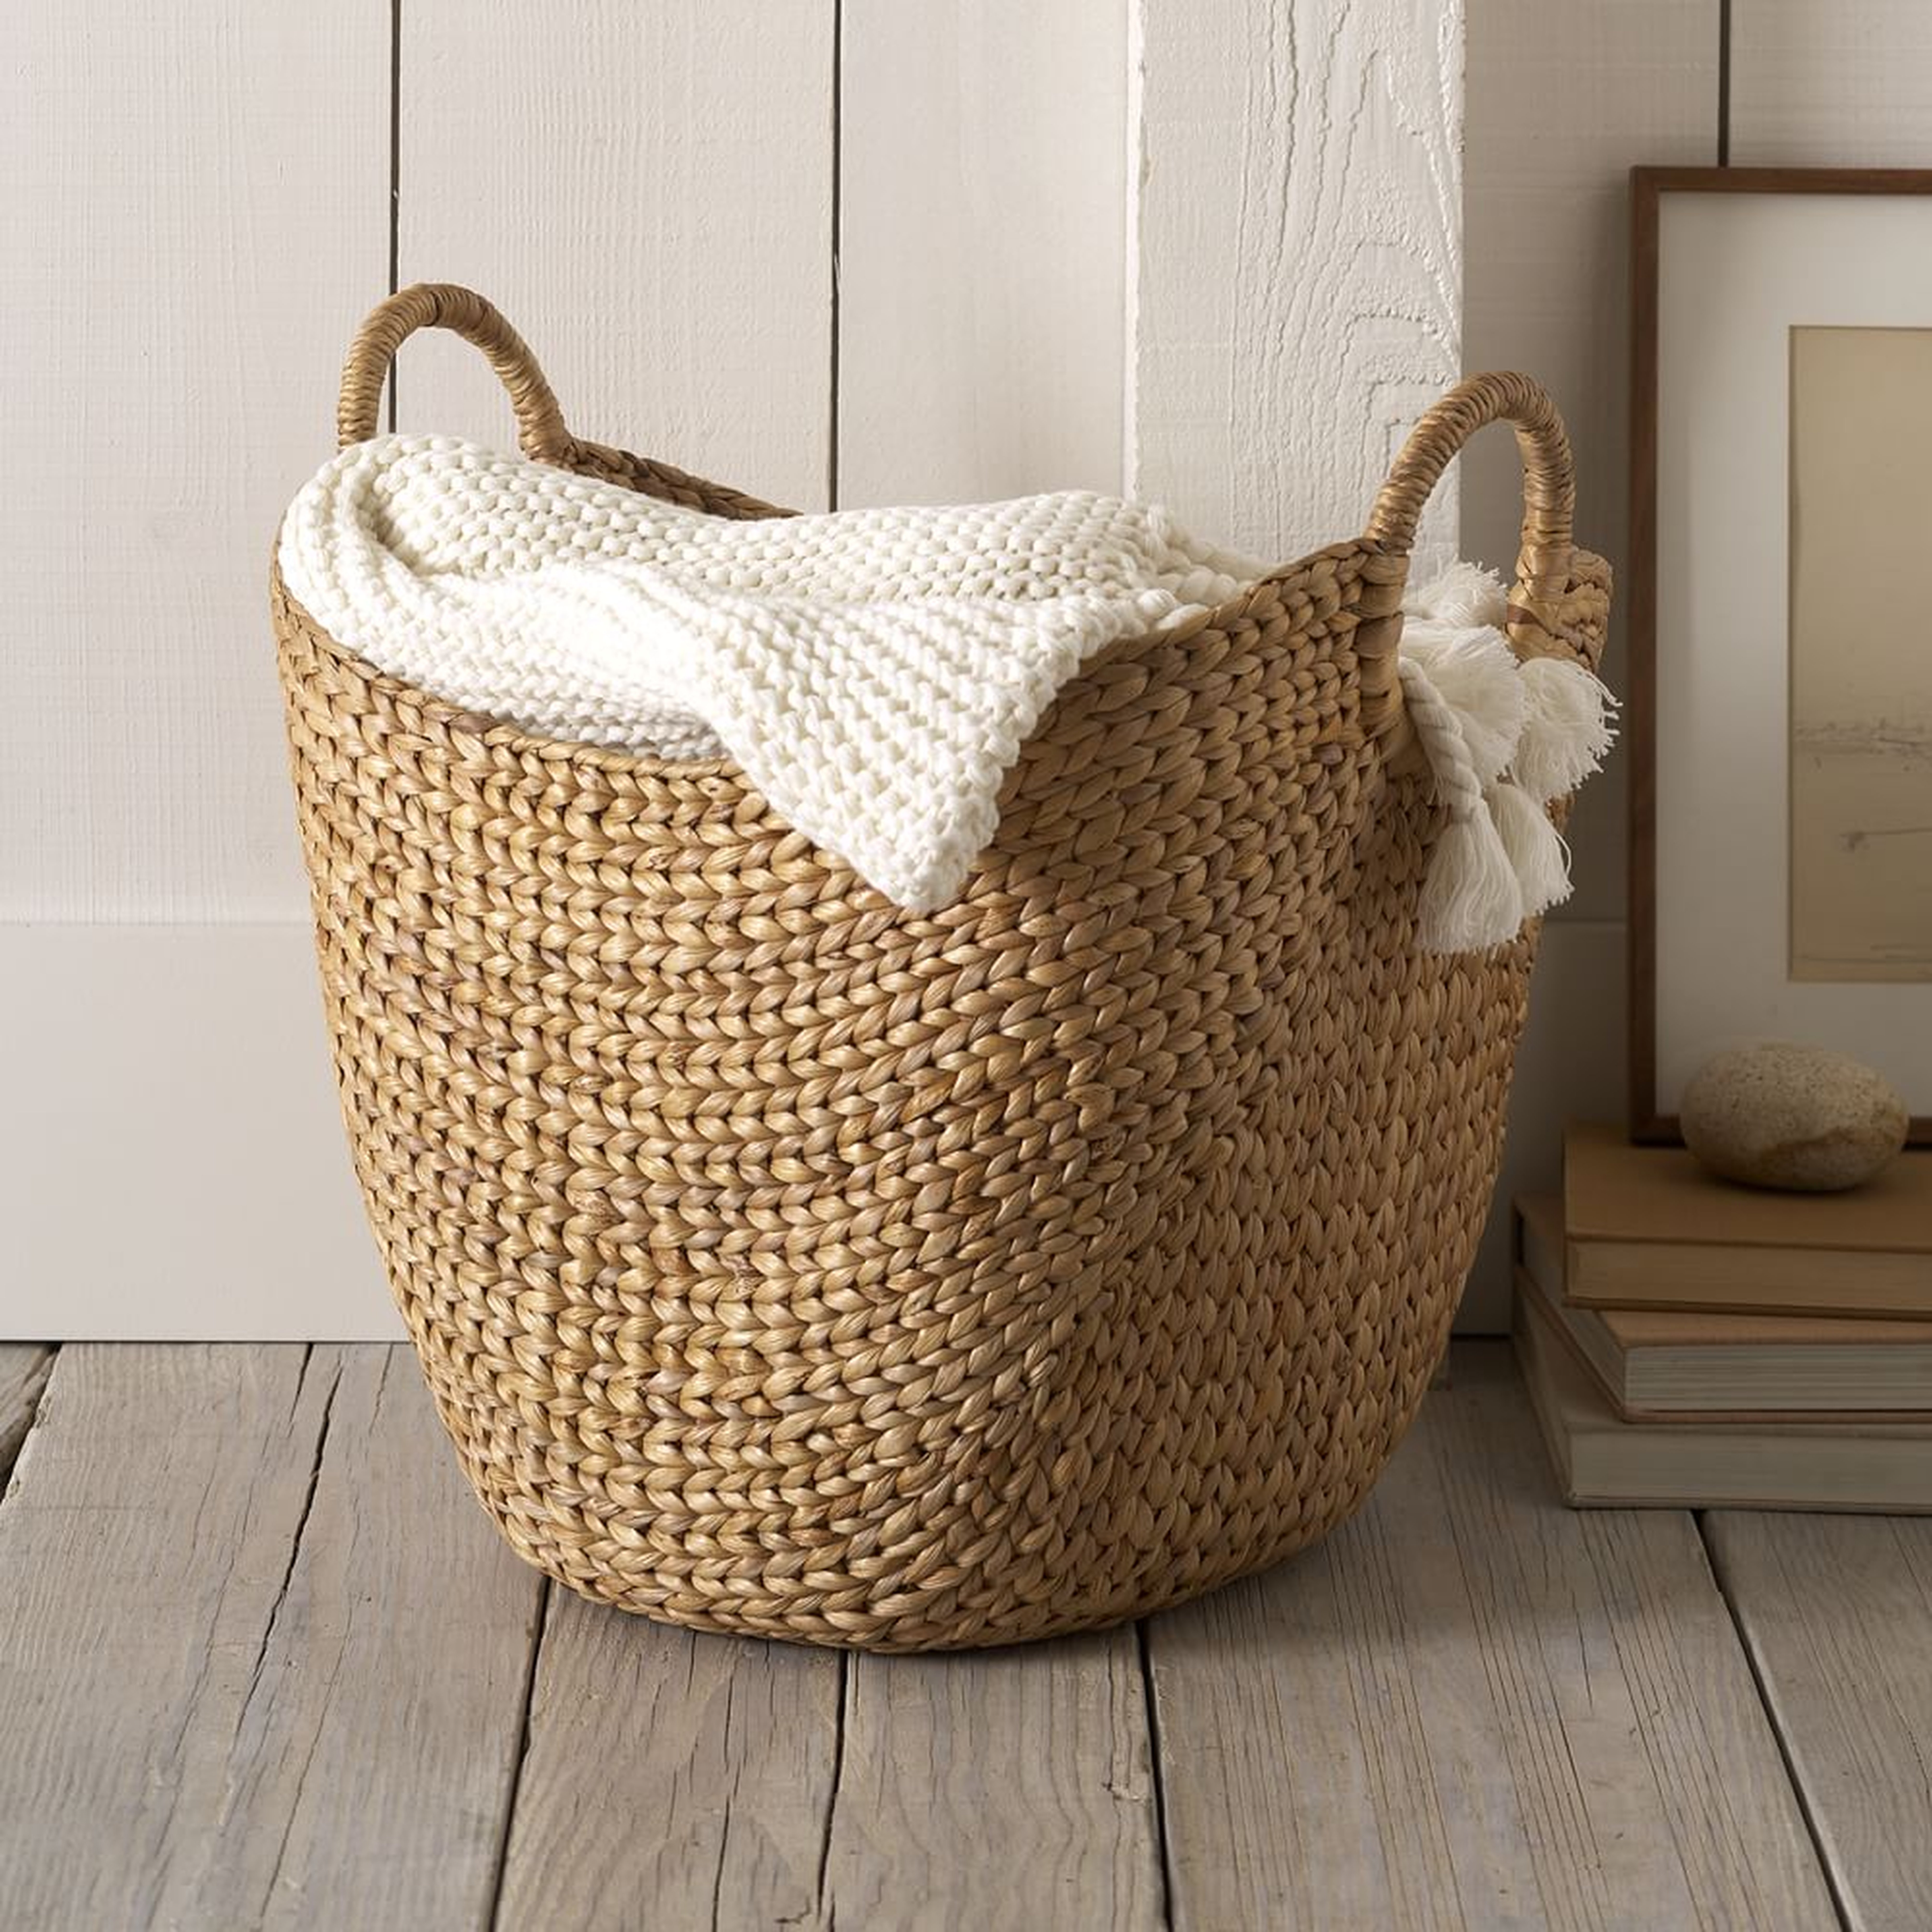 Curved Seagrass Basket, Handle Baskets, Natural, Large, 17.7"W x 21.6"D x 19.3"H - West Elm